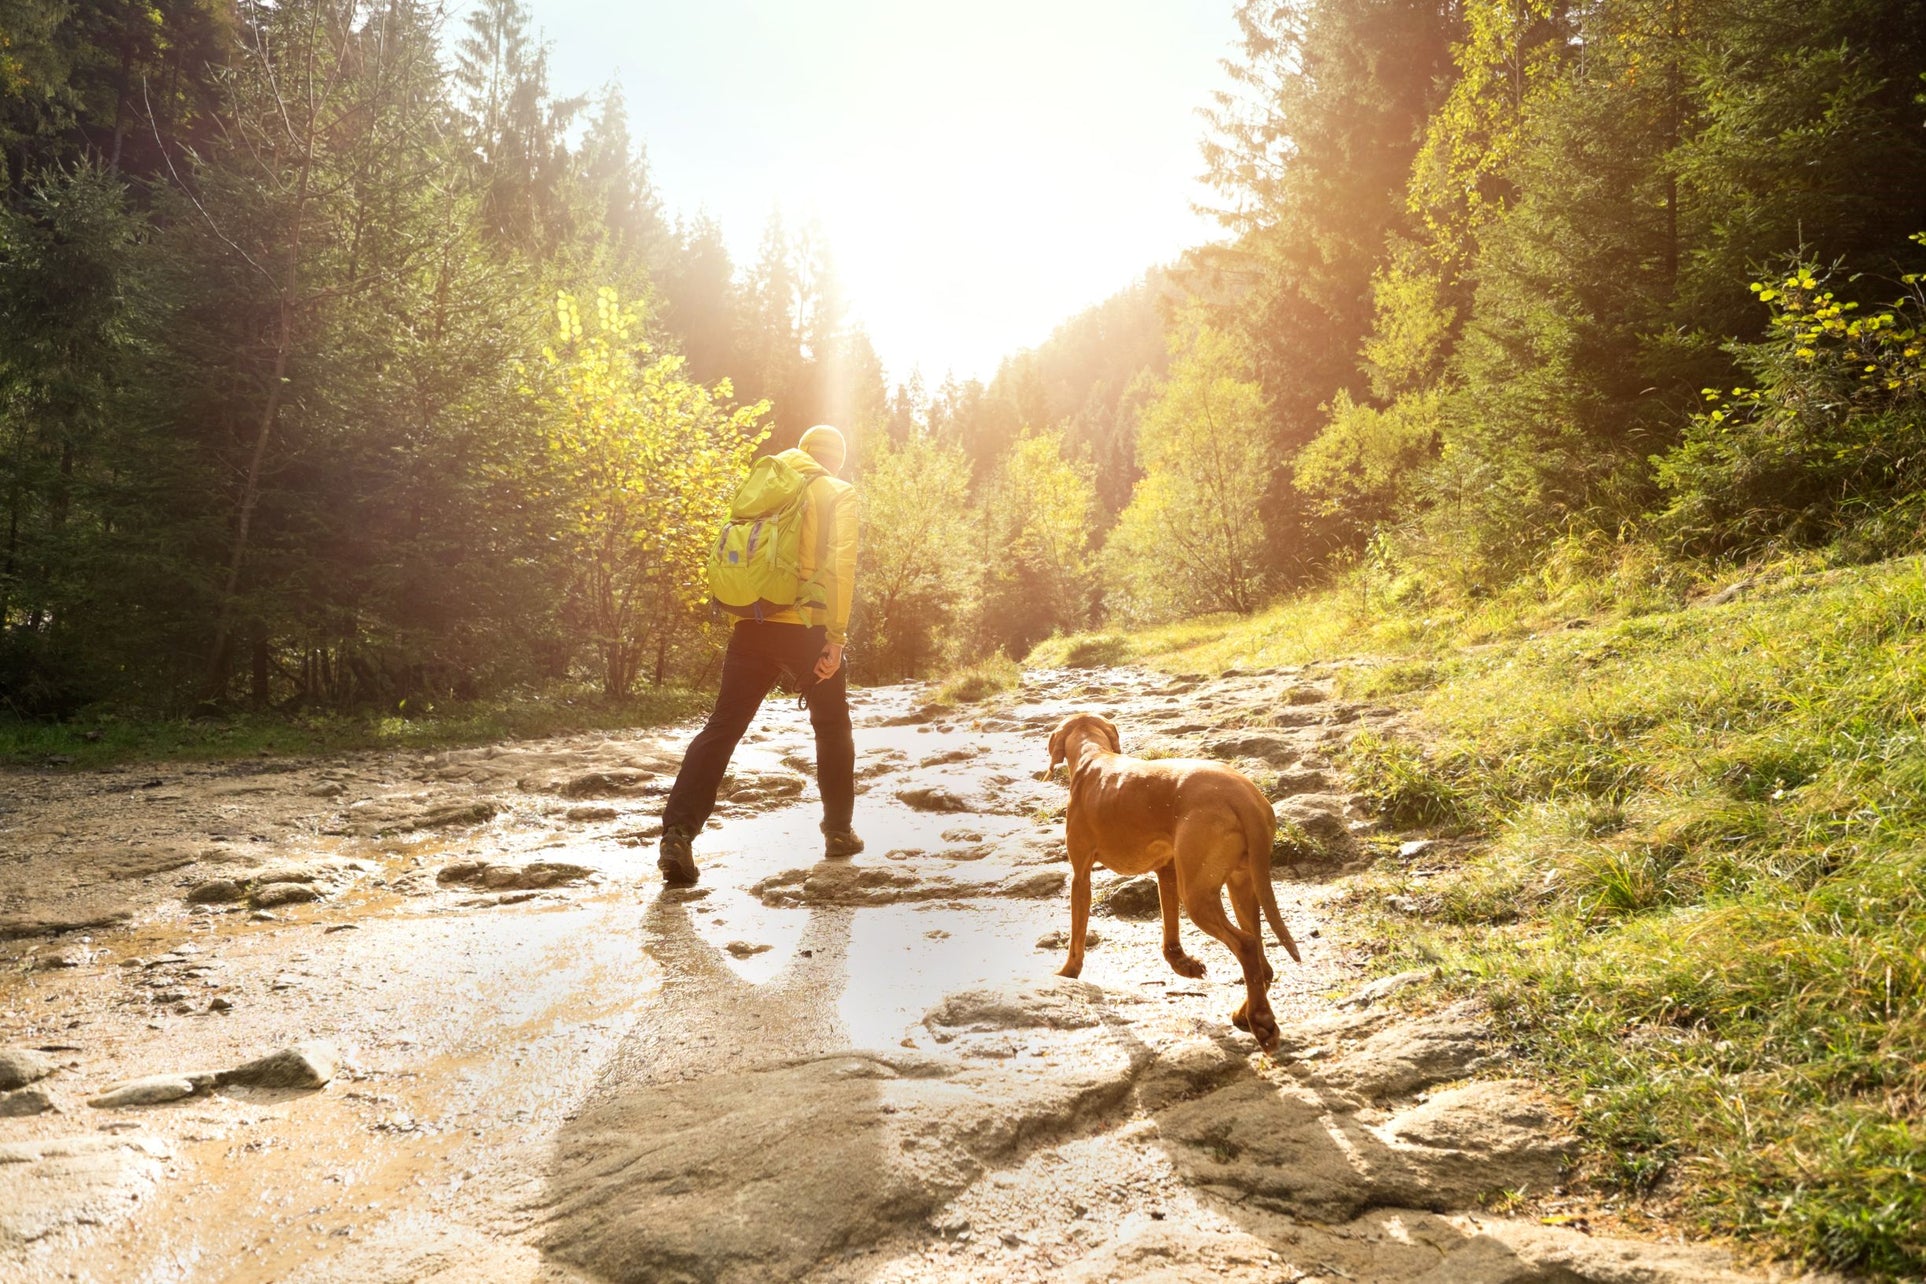 Take your dog on a hike day